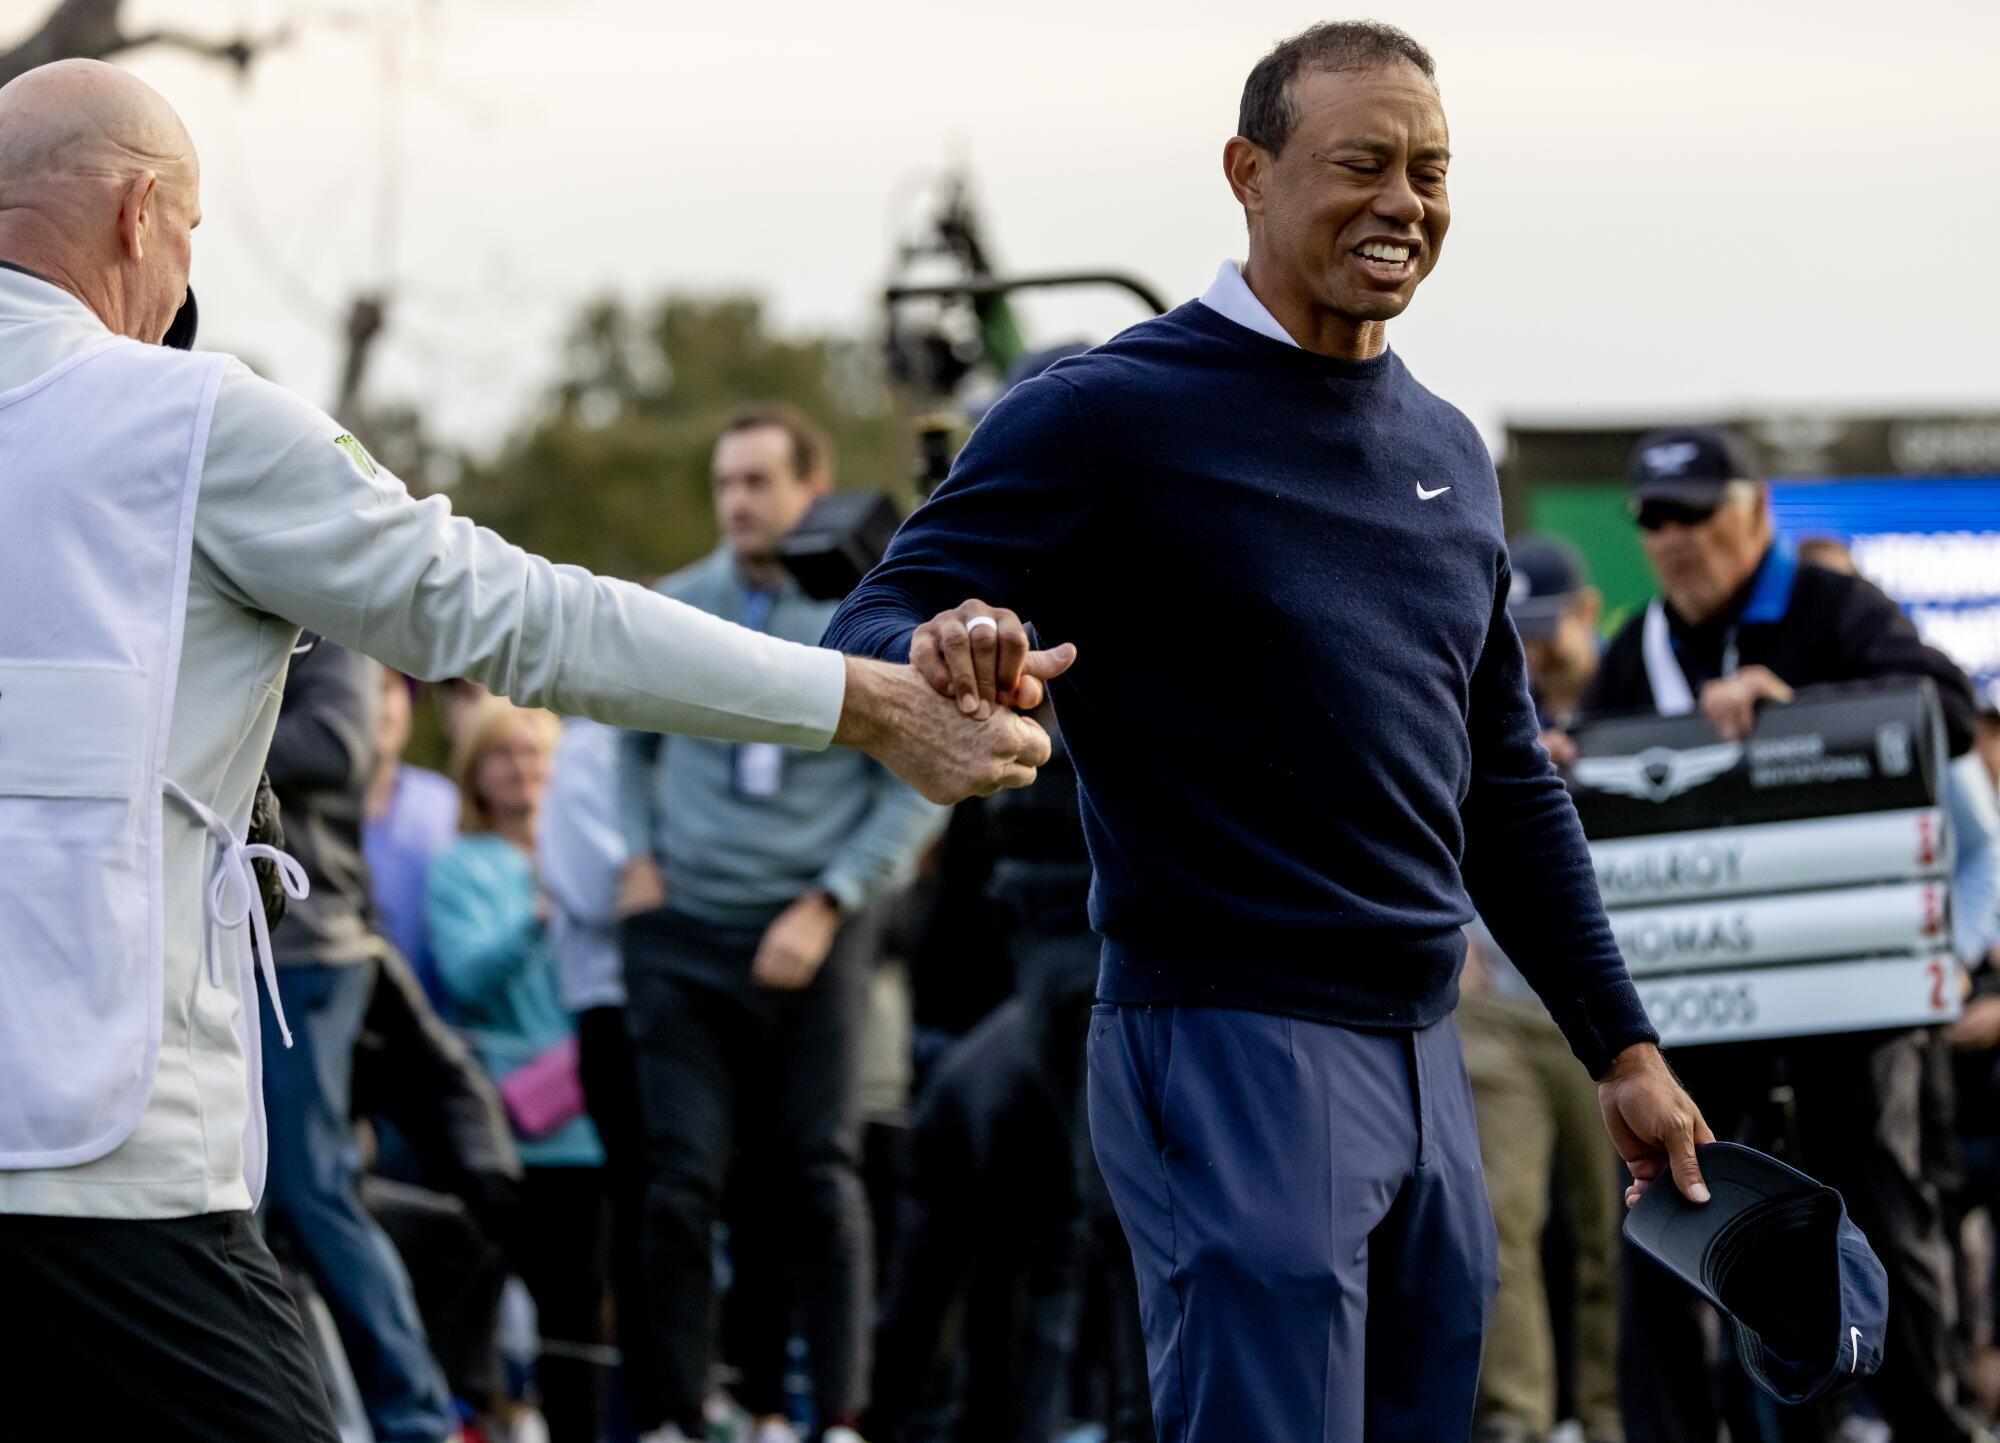 Tiger Woods gets a hand shake from his caddy after finishing the first round.